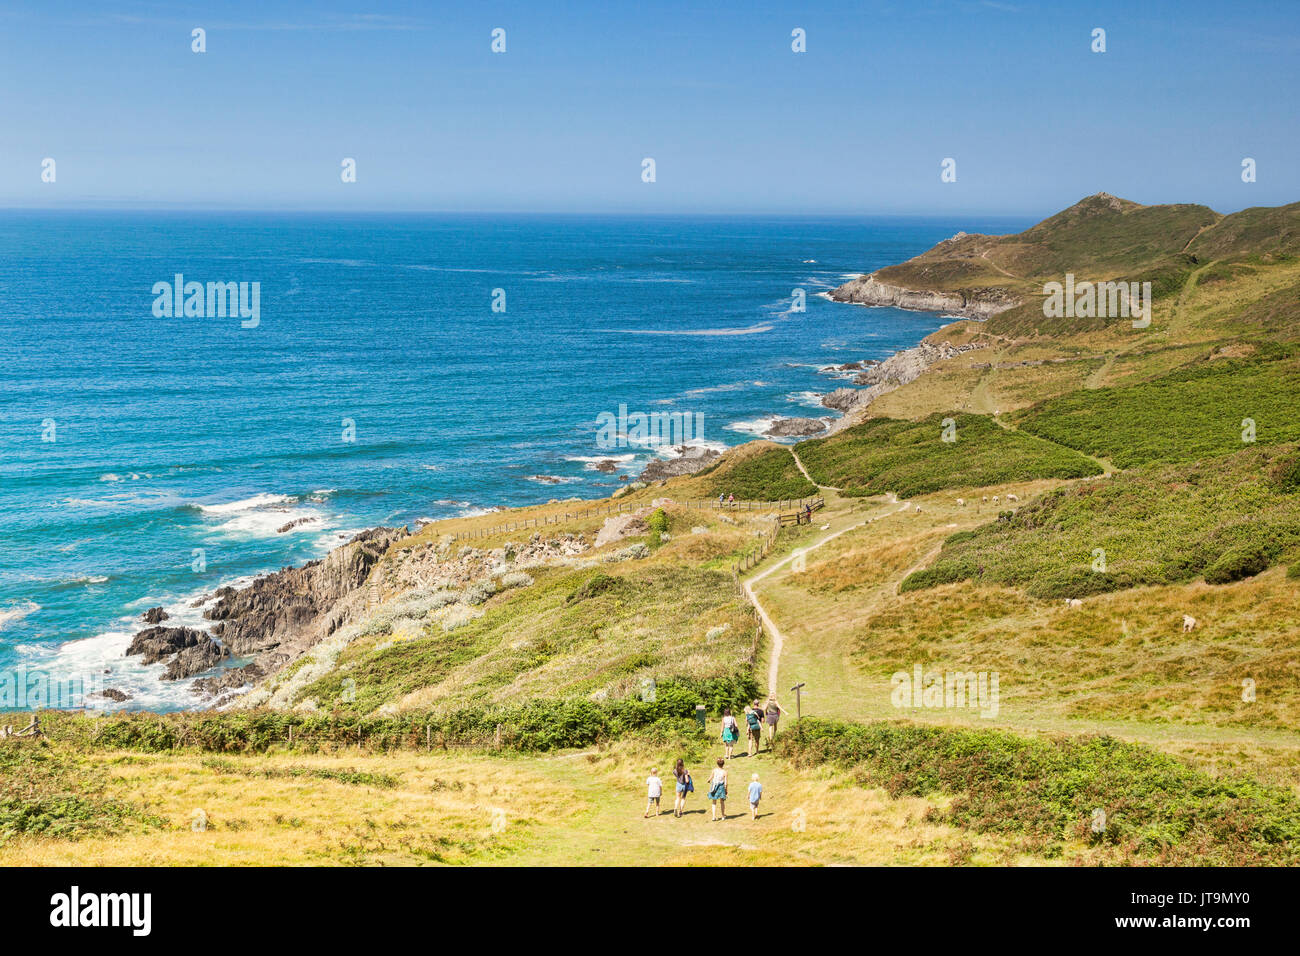 17 June 2017: Woolacombe, Devon, England, UK - A group of people on the South West Coast Path heading towards Morte Point, on one of the hottest days  Stock Photo